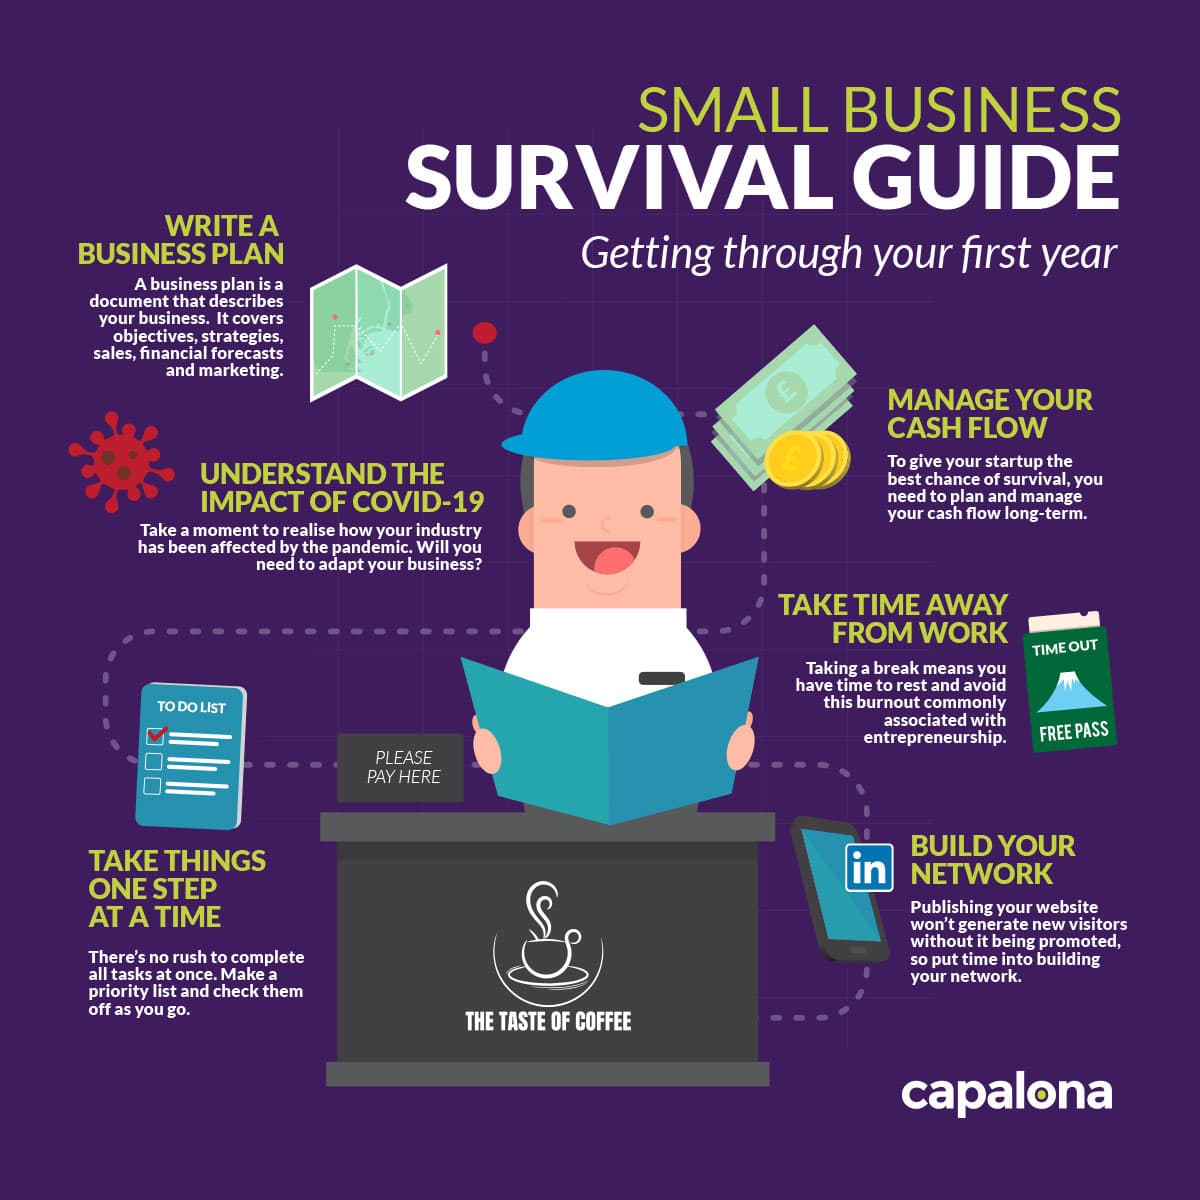 Small business survival guide: Getting though your first year